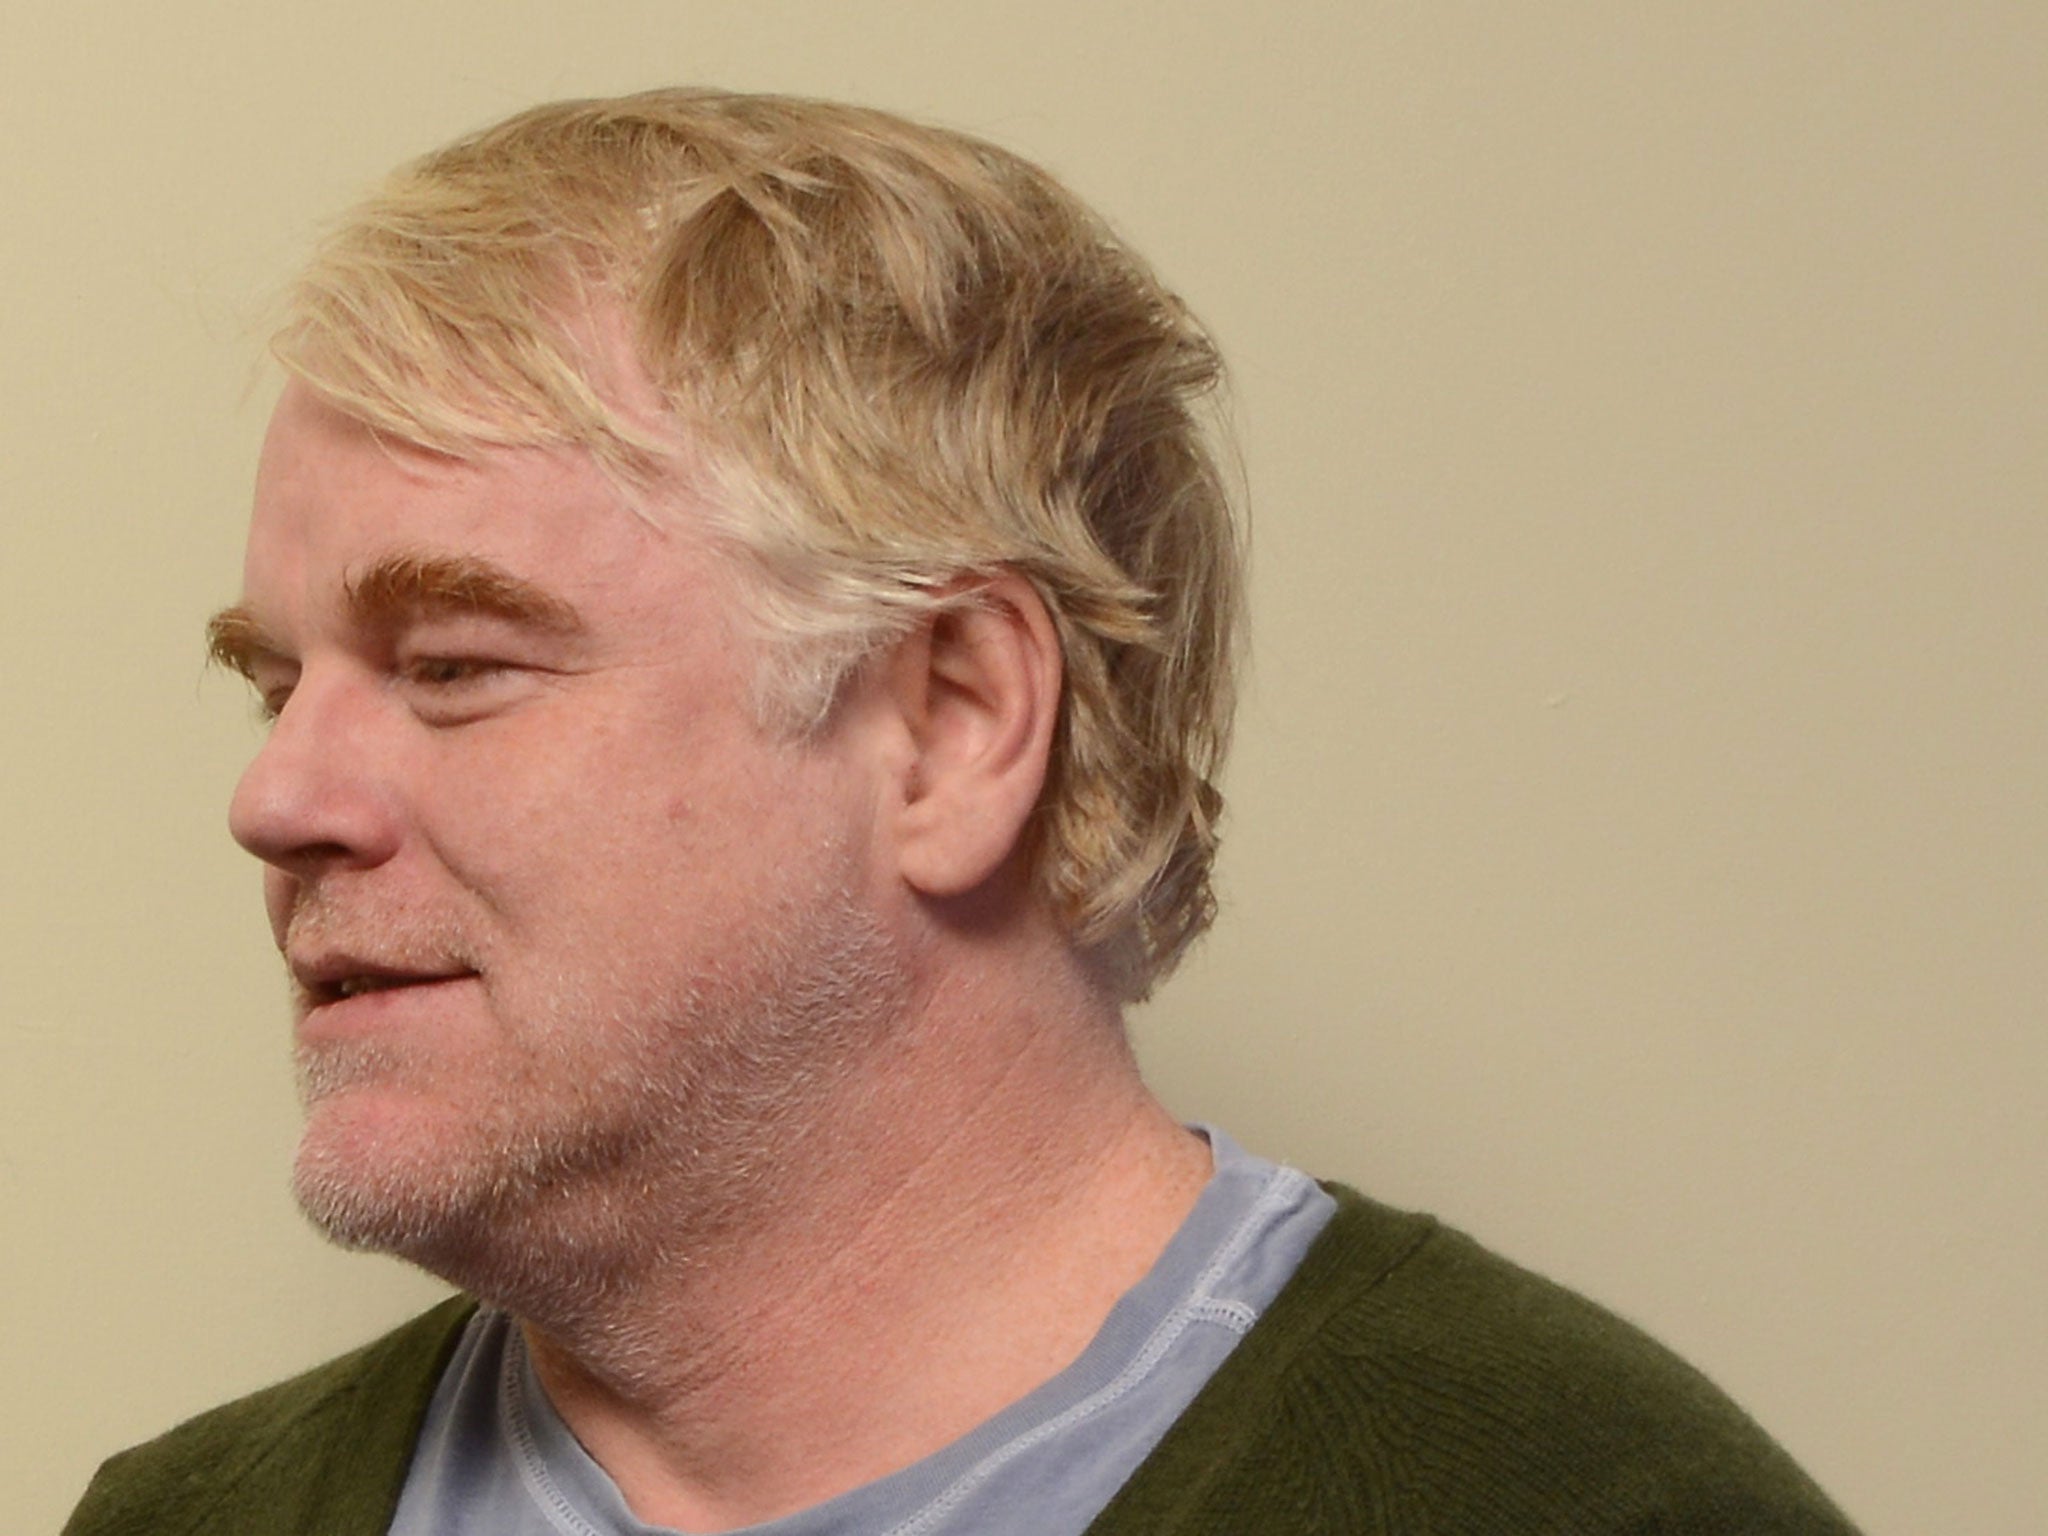 PARK CITY, UT - JANUARY 19: Philip Seymour Hoffman poses for a portrait during the 2014 Sundance Film Festival at the Getty Images Portrait Studio at the Village At The Lift on January 19, 2014 in Park City, Utah.